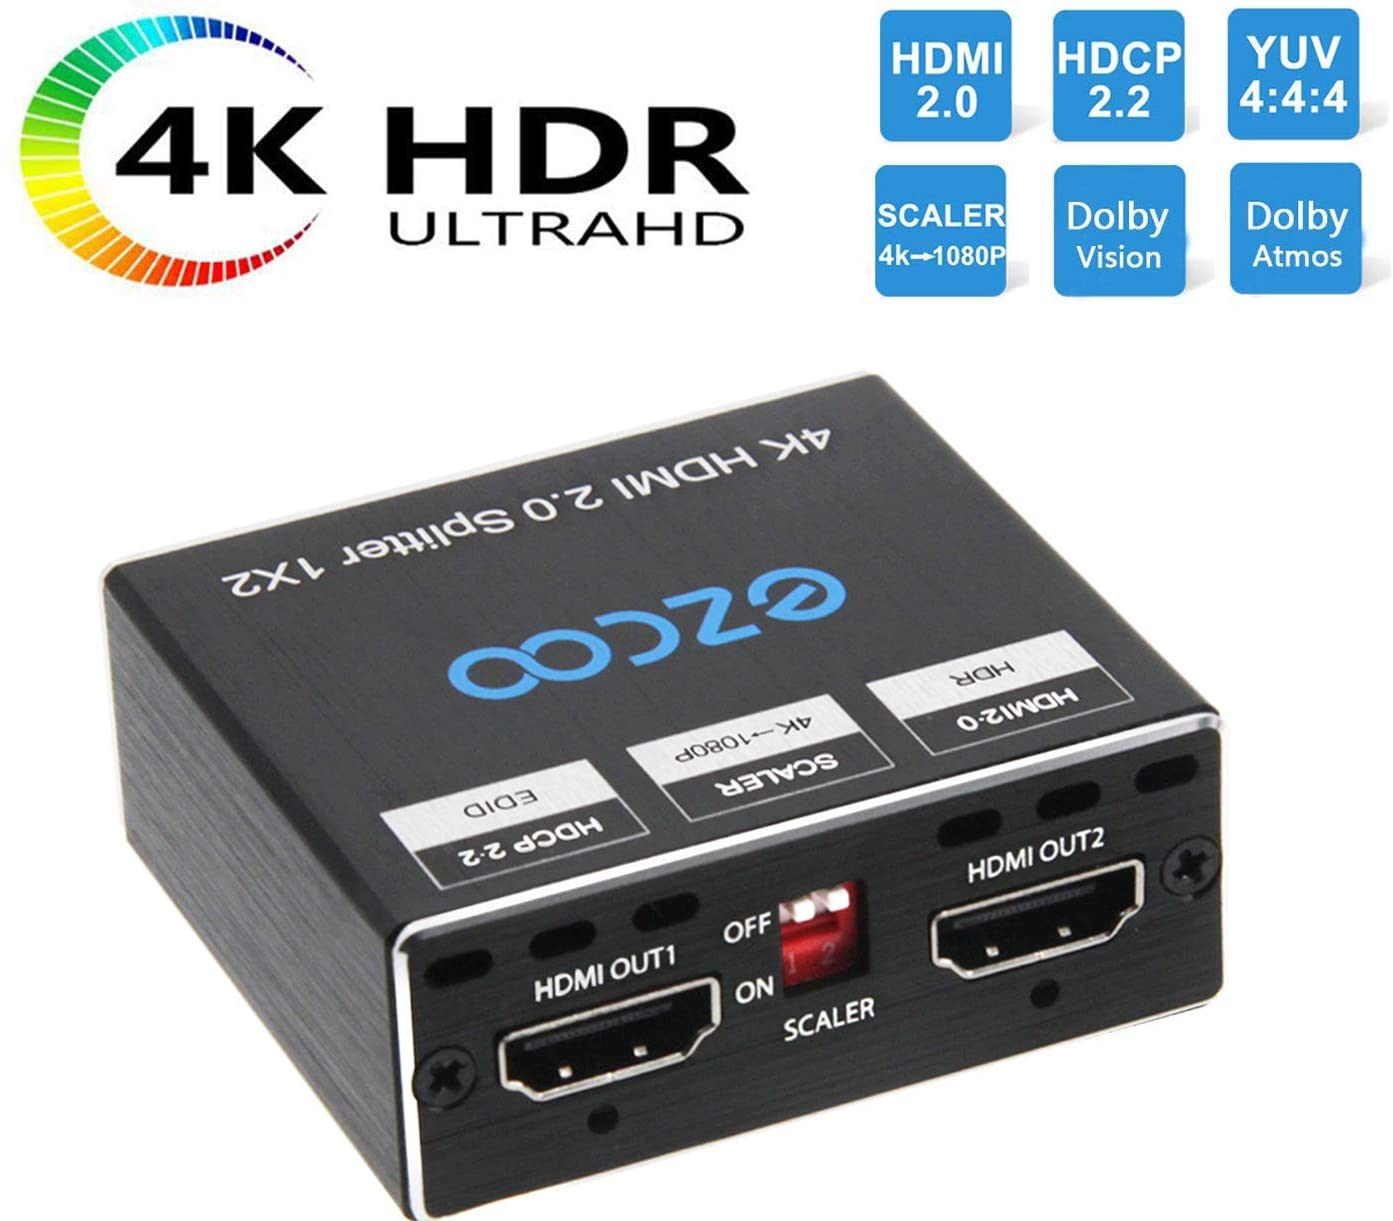 HDMI Splitter 1 in2 out 4K 60Hz 4:4:4 HDR Dolby Vision Dolby Atmos Firmware Upgrade HDCP2.2 Scaler 4K 1080P Scaler EDID Switch,USB Power